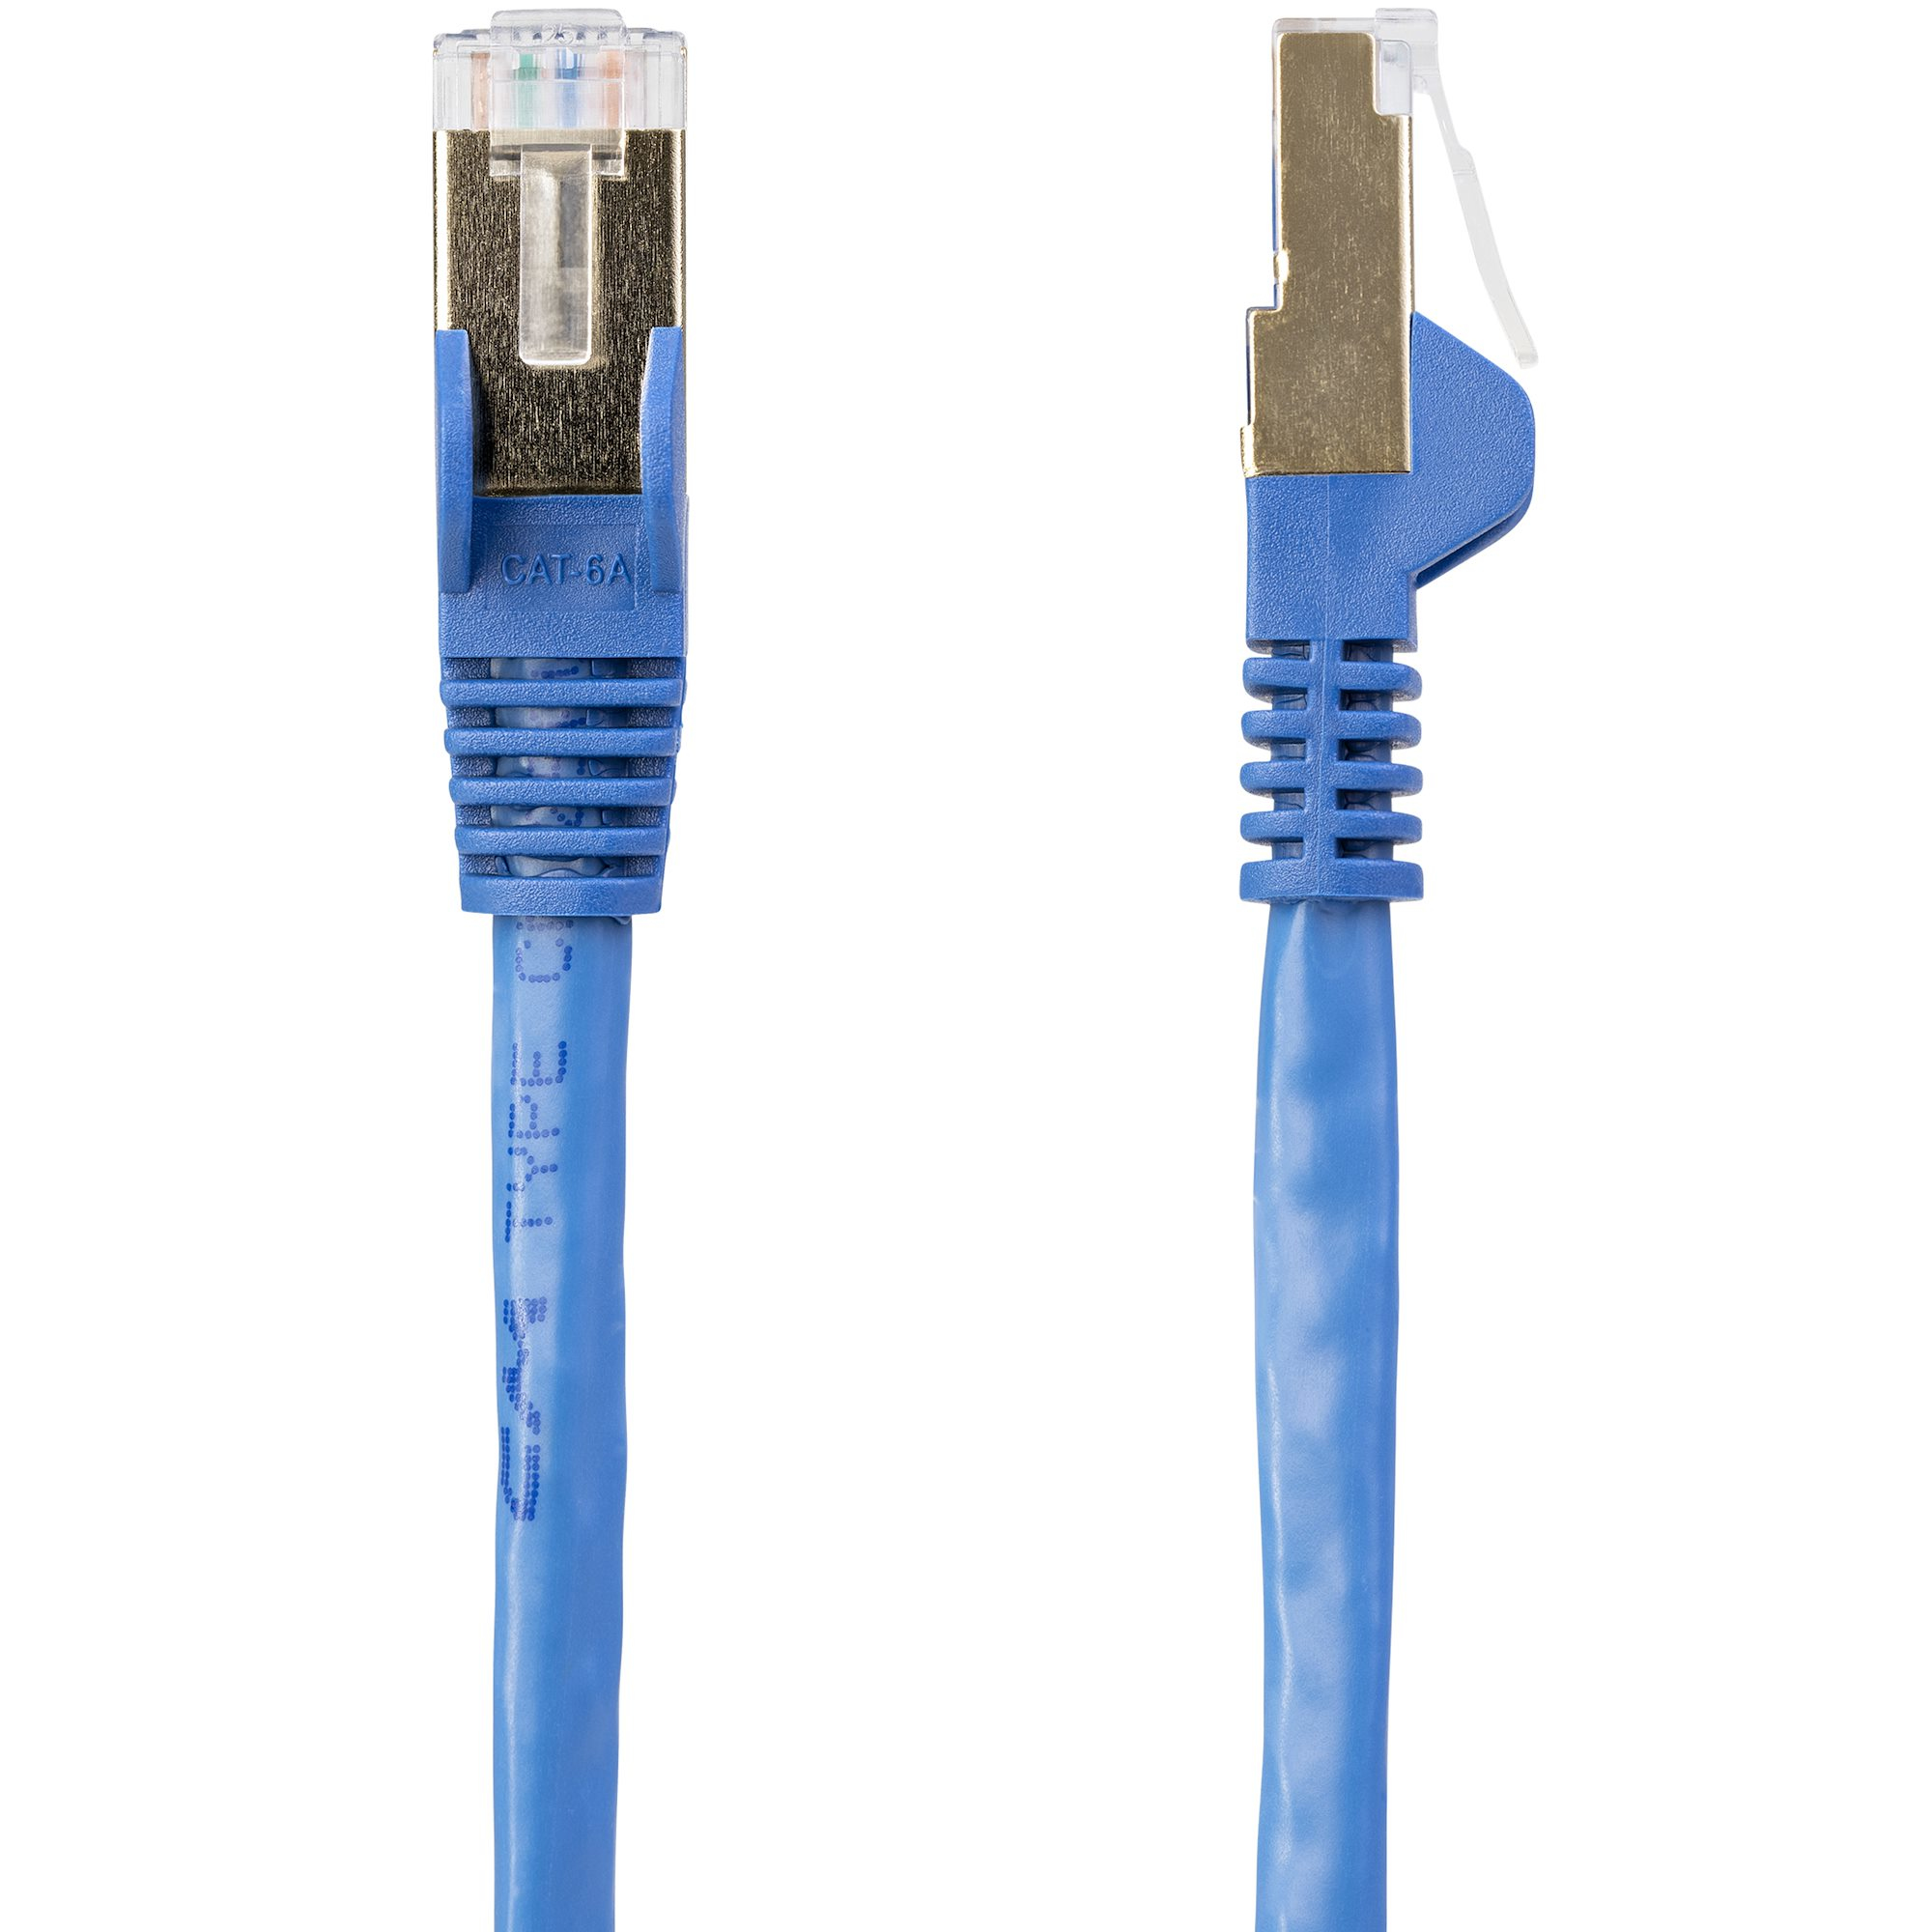 StarTech.com 5m CAT6A Ethernet Cable, 10 Gigabit Shielded Snagless RJ45 100W PoE Patch Cord, CAT 6A 10GbE STP Network Cable w/Strain Relief, Blue, Fluke Tested/UL Certified Wiring/TIA - Category 6A - 26AWG (6ASPAT5MBL)